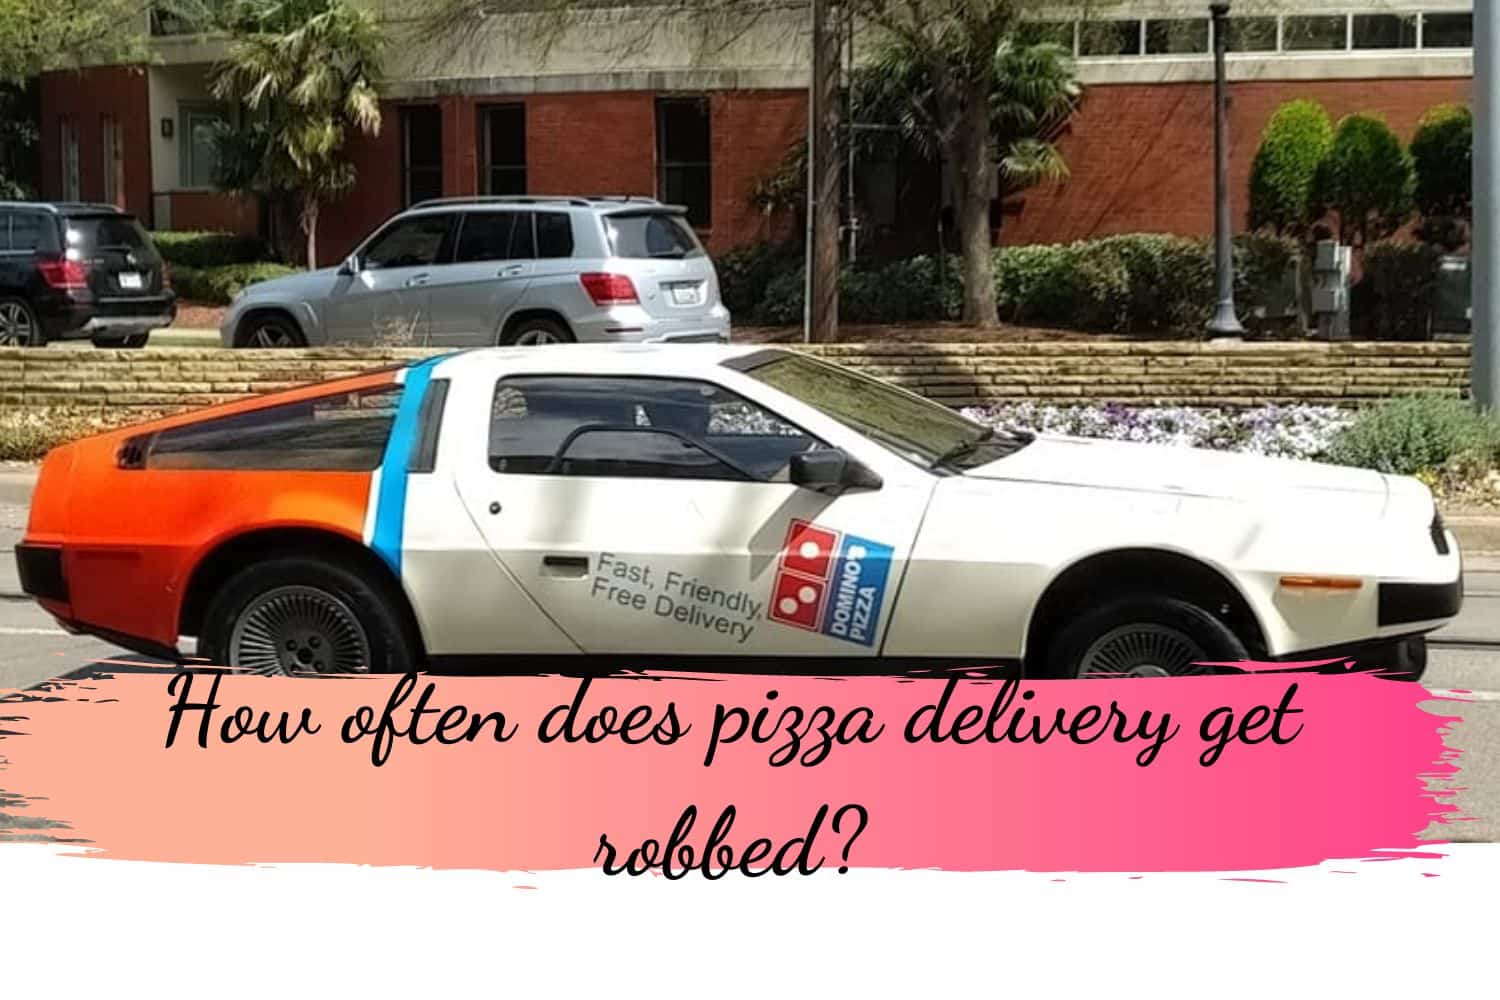 How often does pizza delivery get robbed